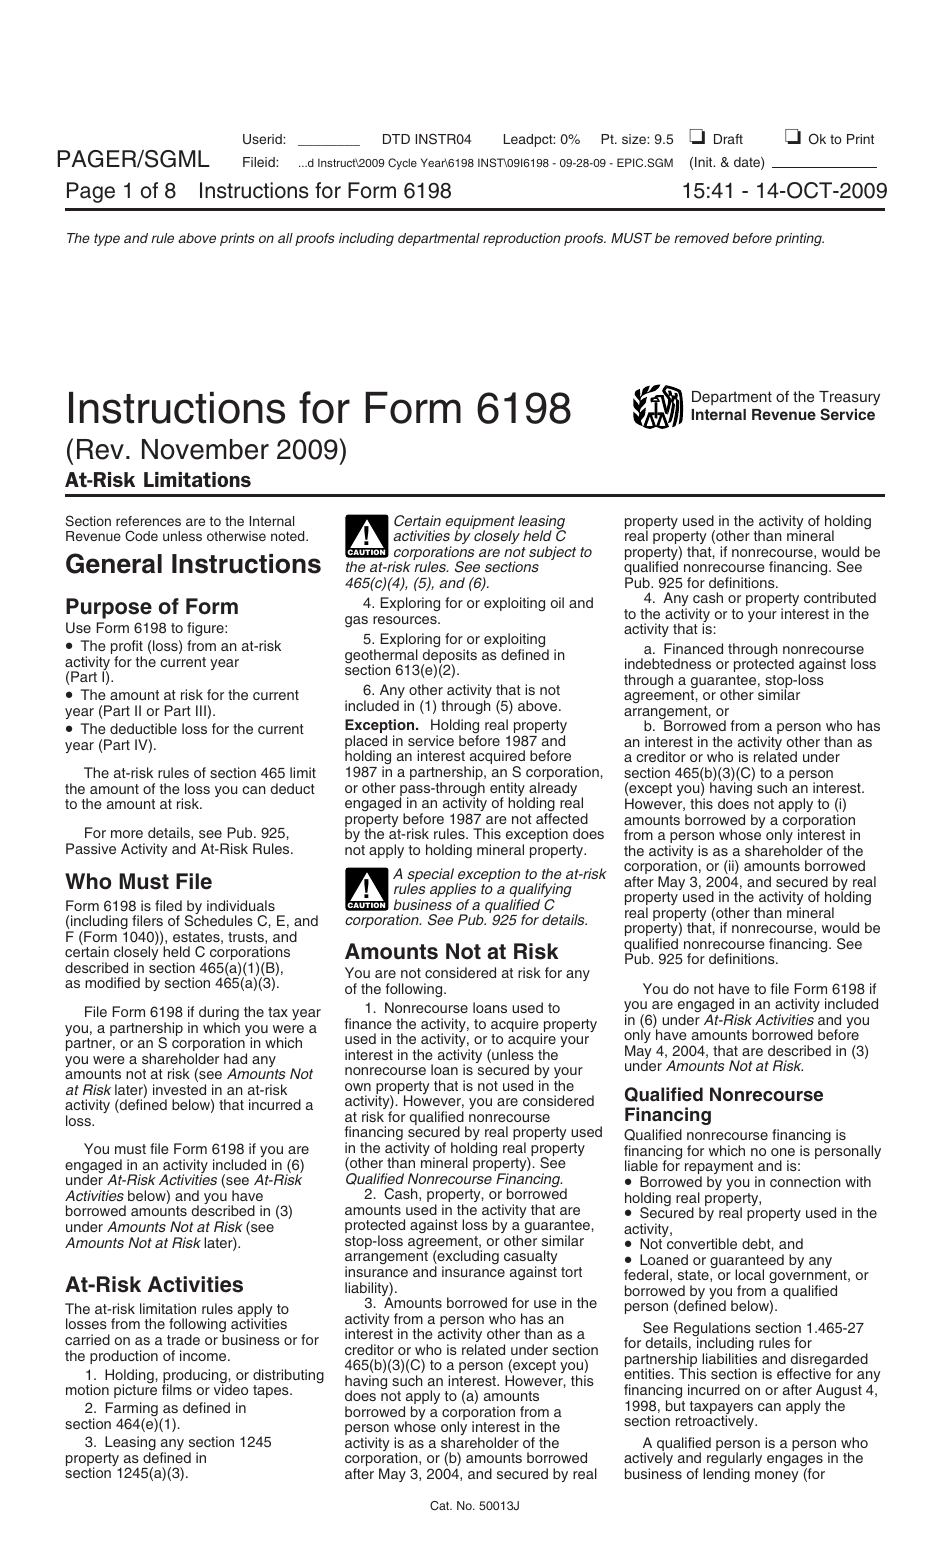 Instructions for IRS Form 6198 At-Risk Limitations, Page 1